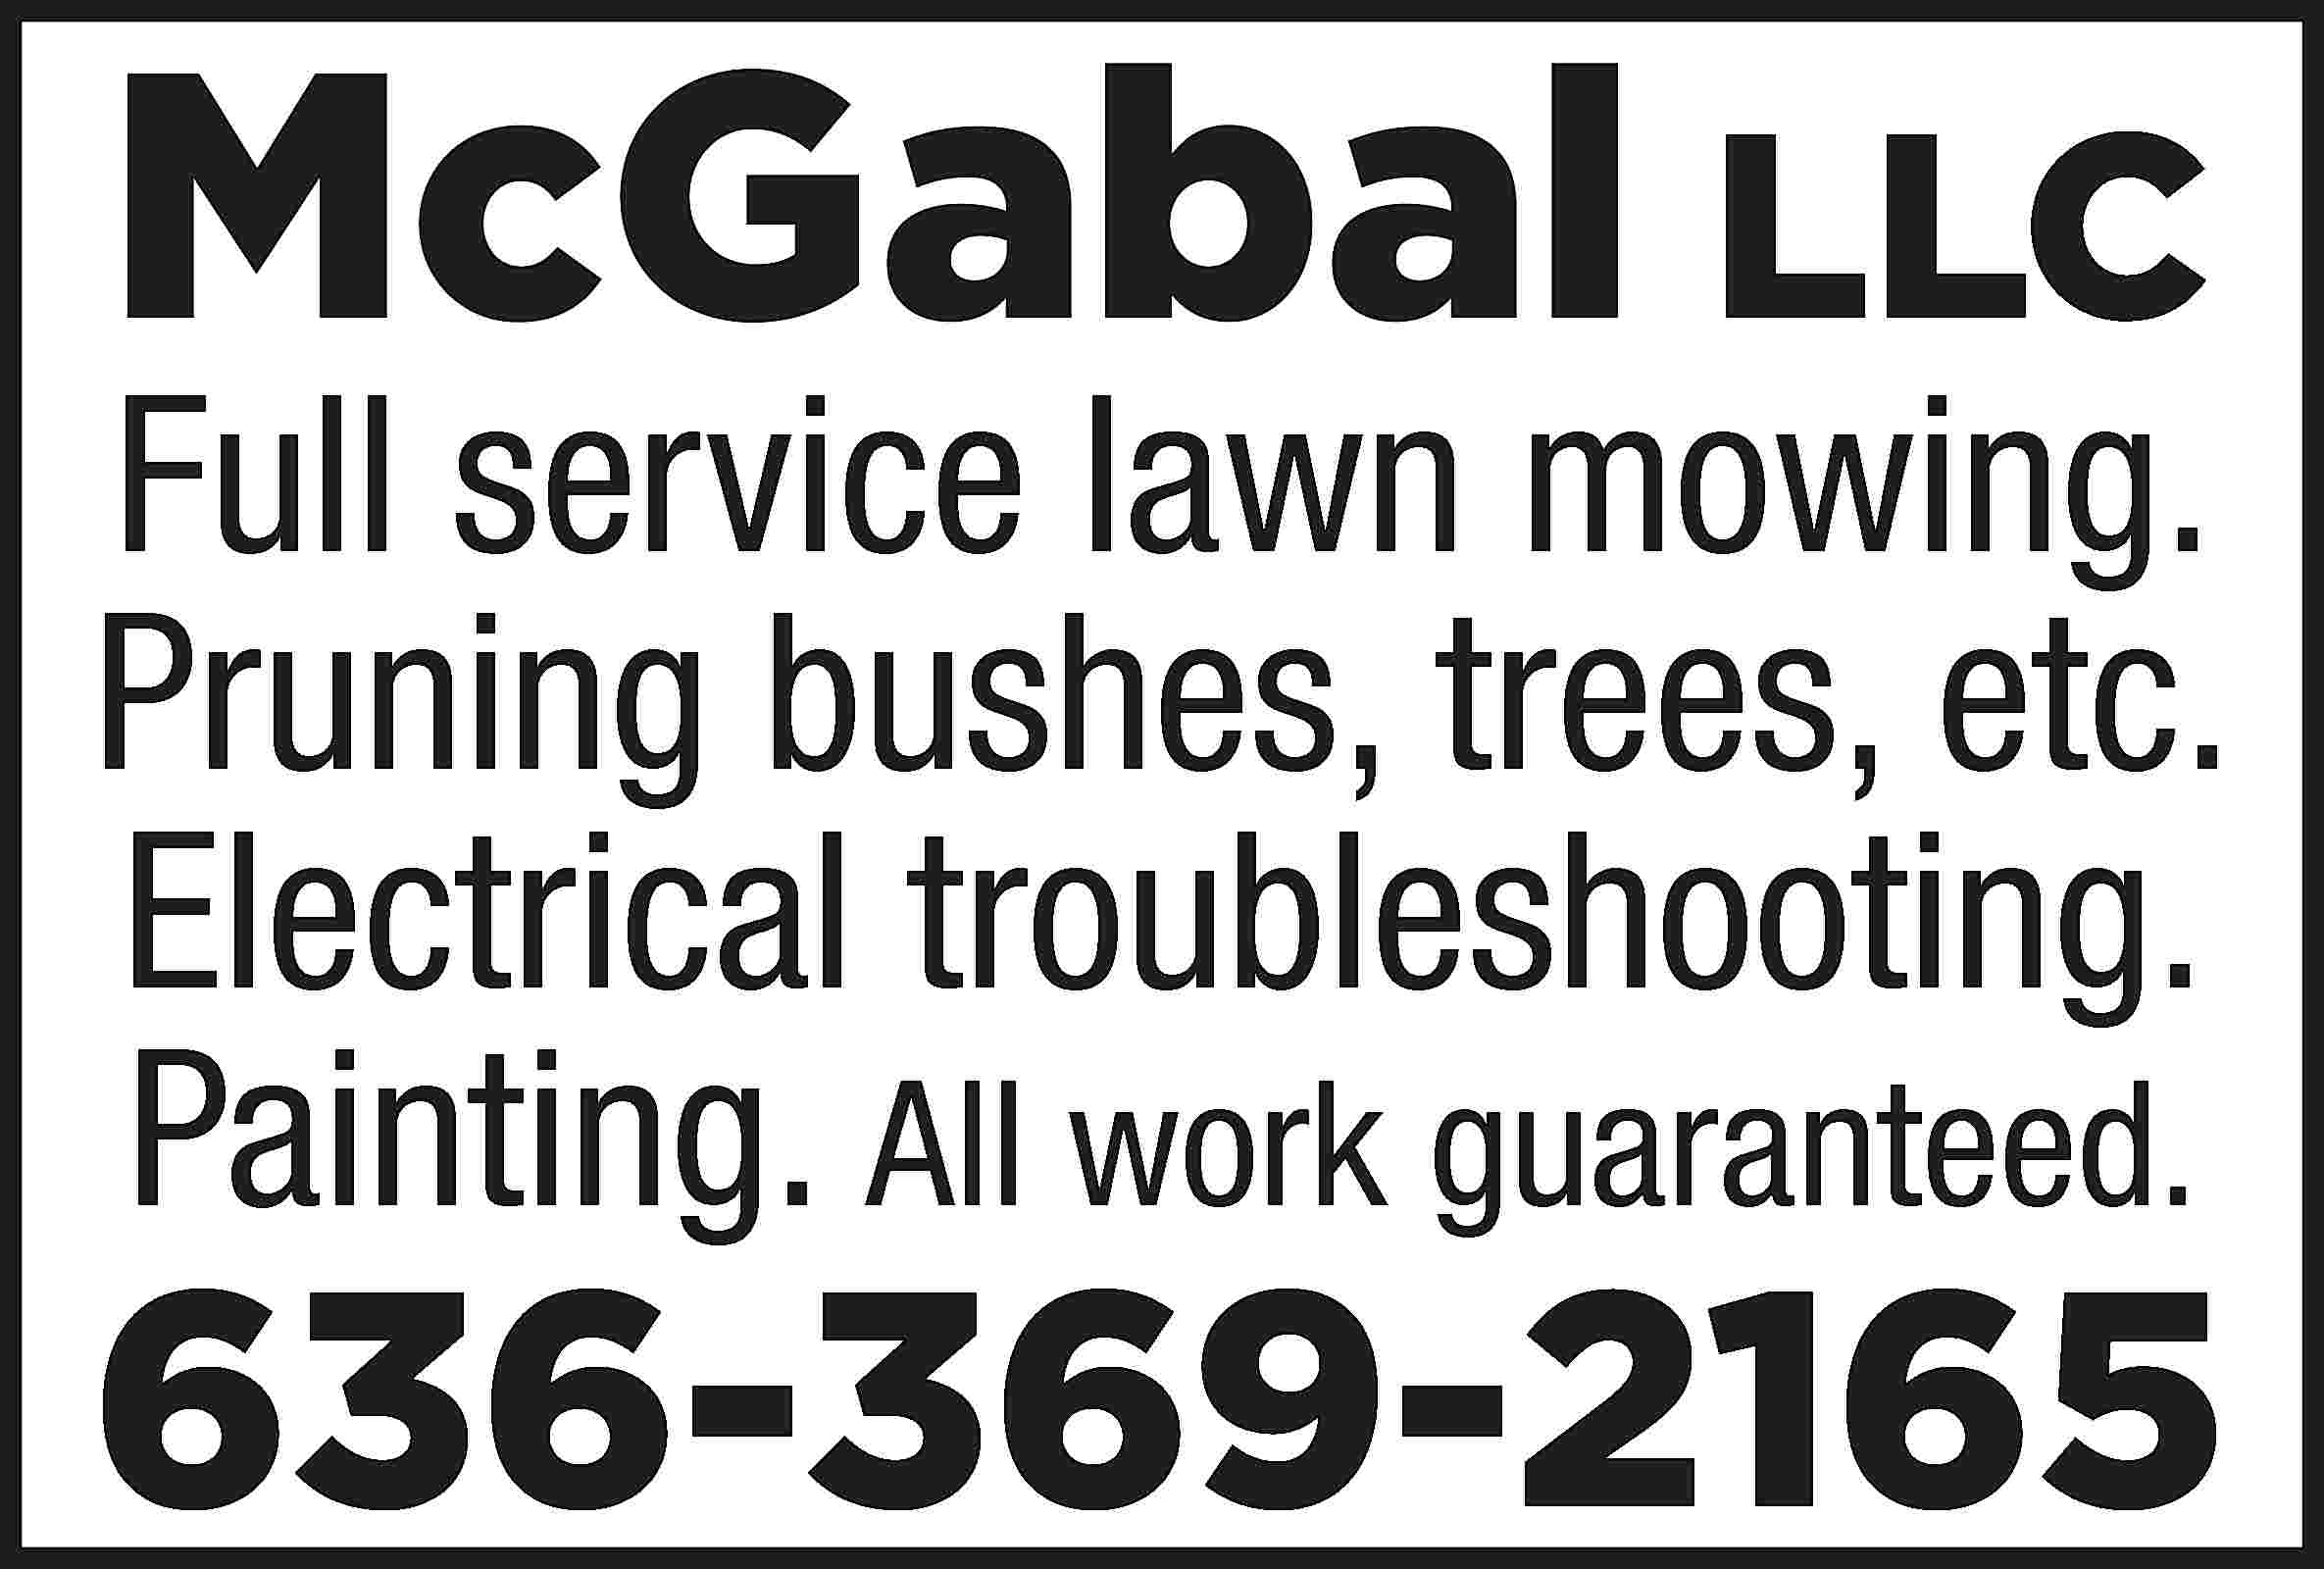 McGabal LLC Full service lawn  McGabal LLC Full service lawn mowing. Pruning bushes, trees, etc. Electrical troubleshooting. Painting. All work guaranteed. 636-369-2165